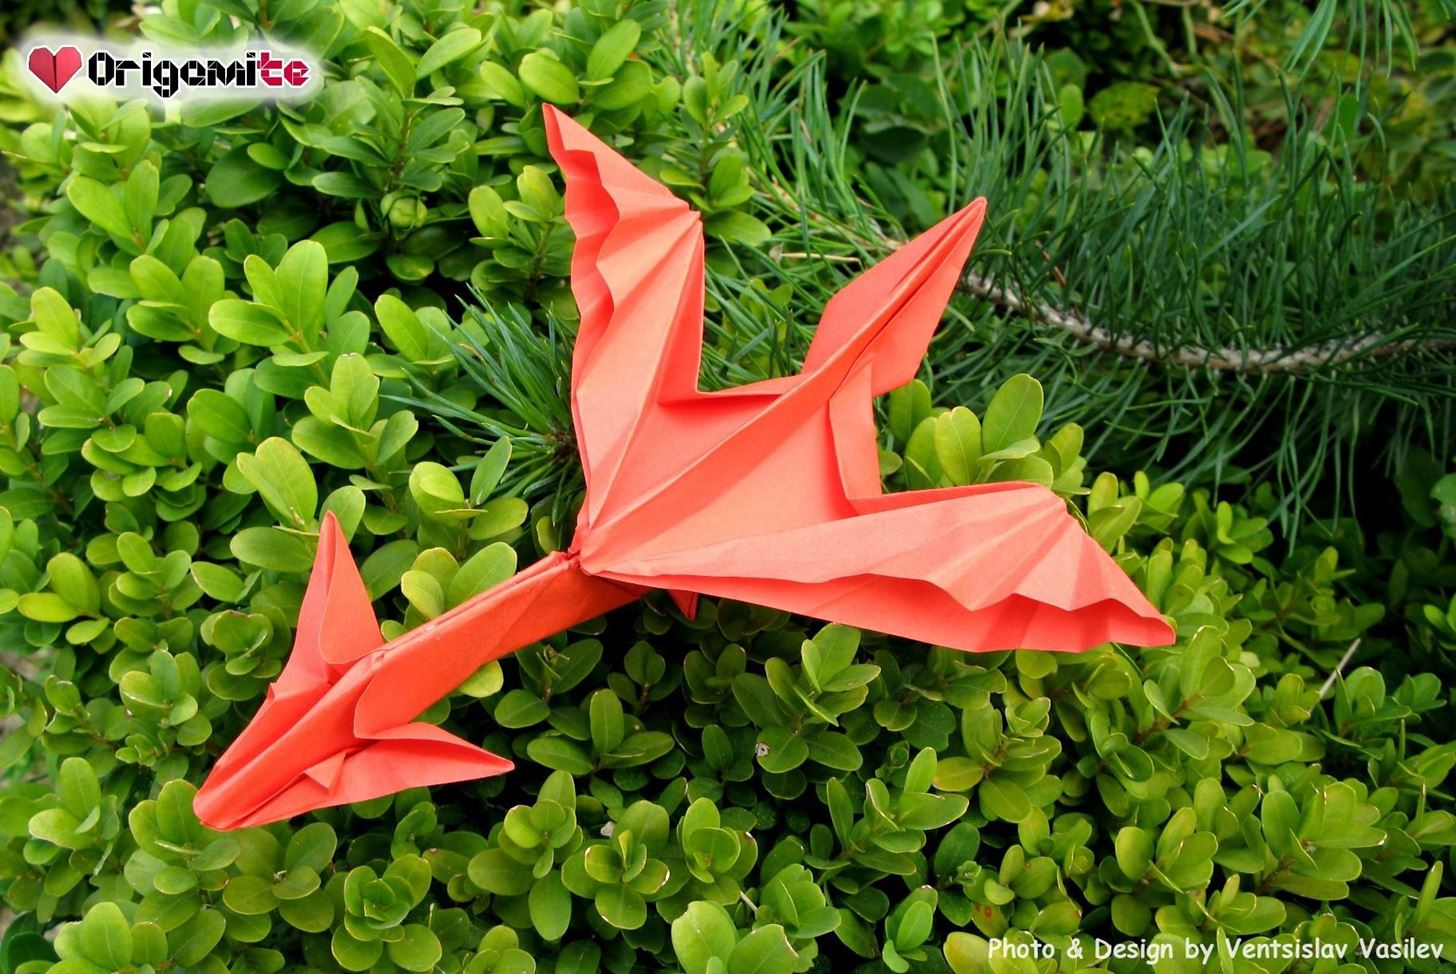 How To Do An Origami Dragon How To Make An Origami Dragon A4 Easy Origami Wonderhowto